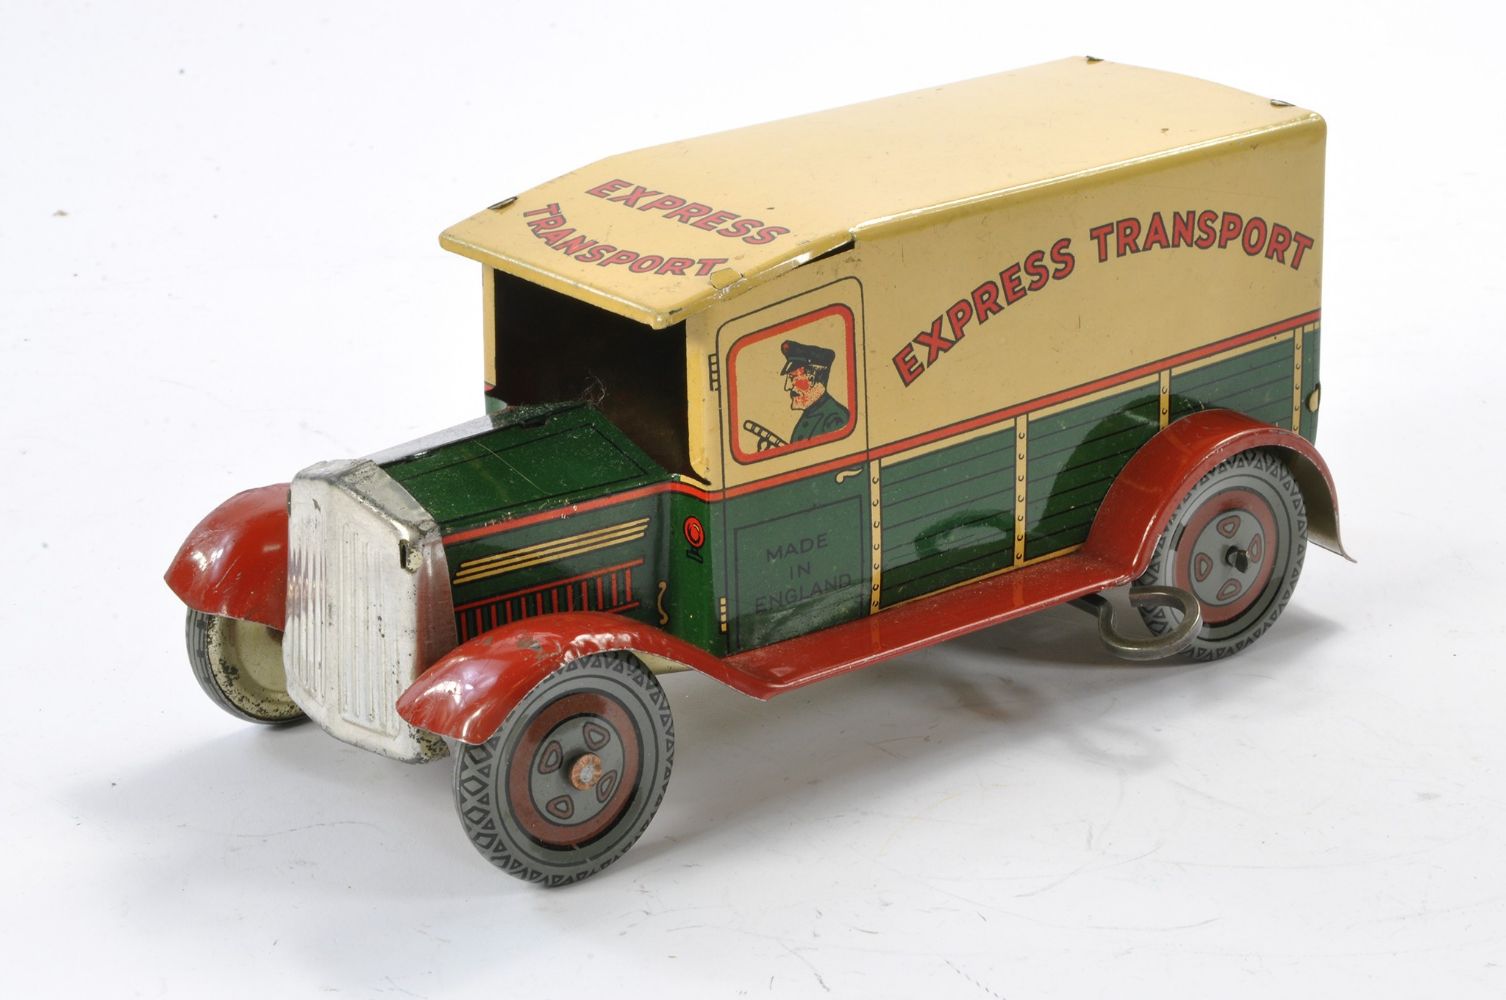 January Specialist Toys, Models and Collectables Auction